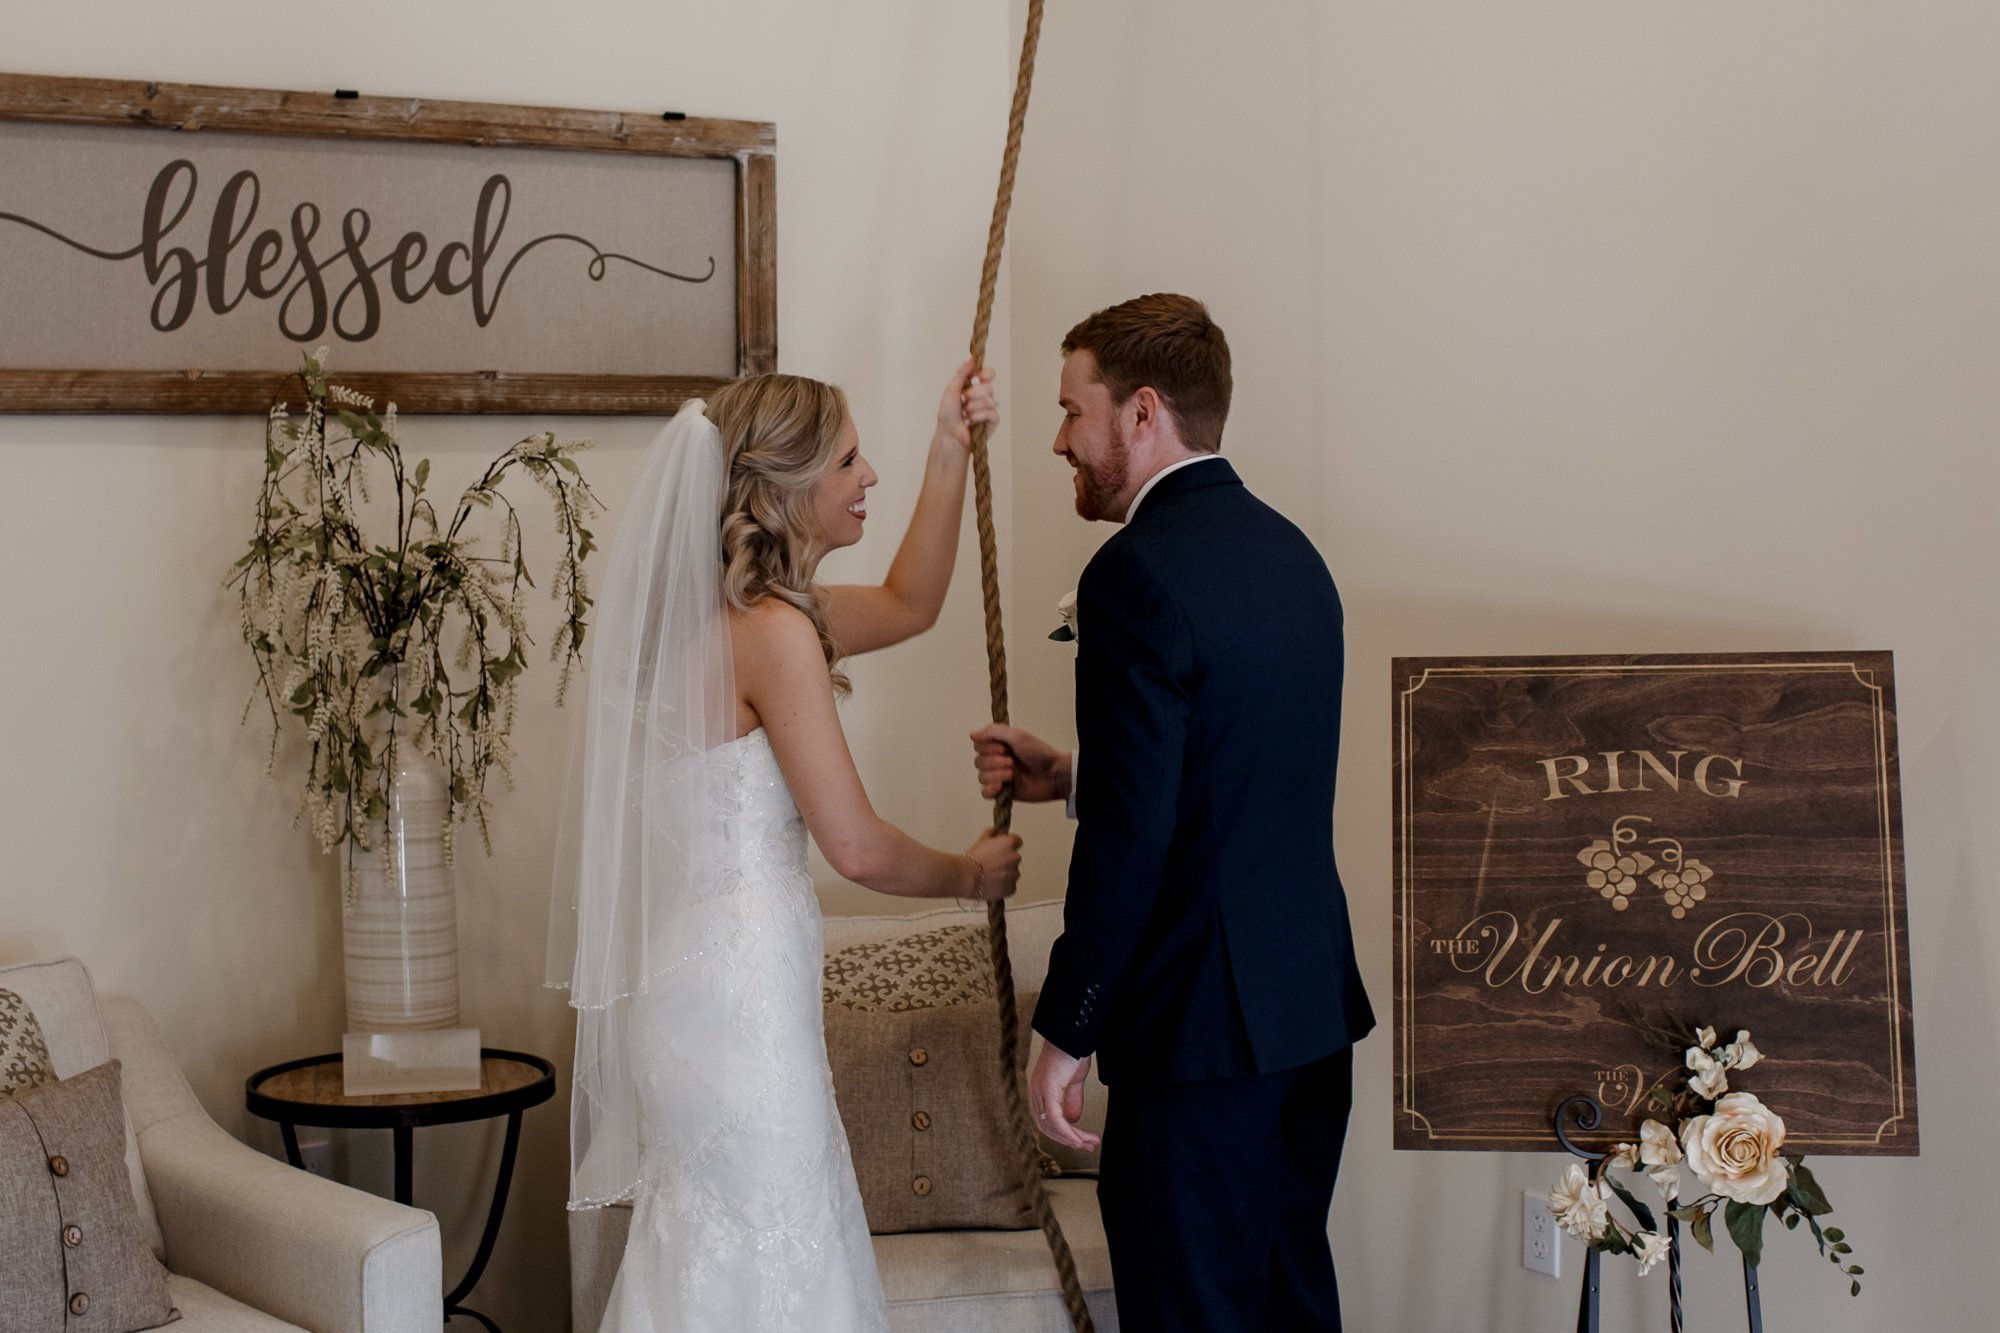 Bride and groom ringing the bell. Wedding at The Vine (New Ulm, TX)